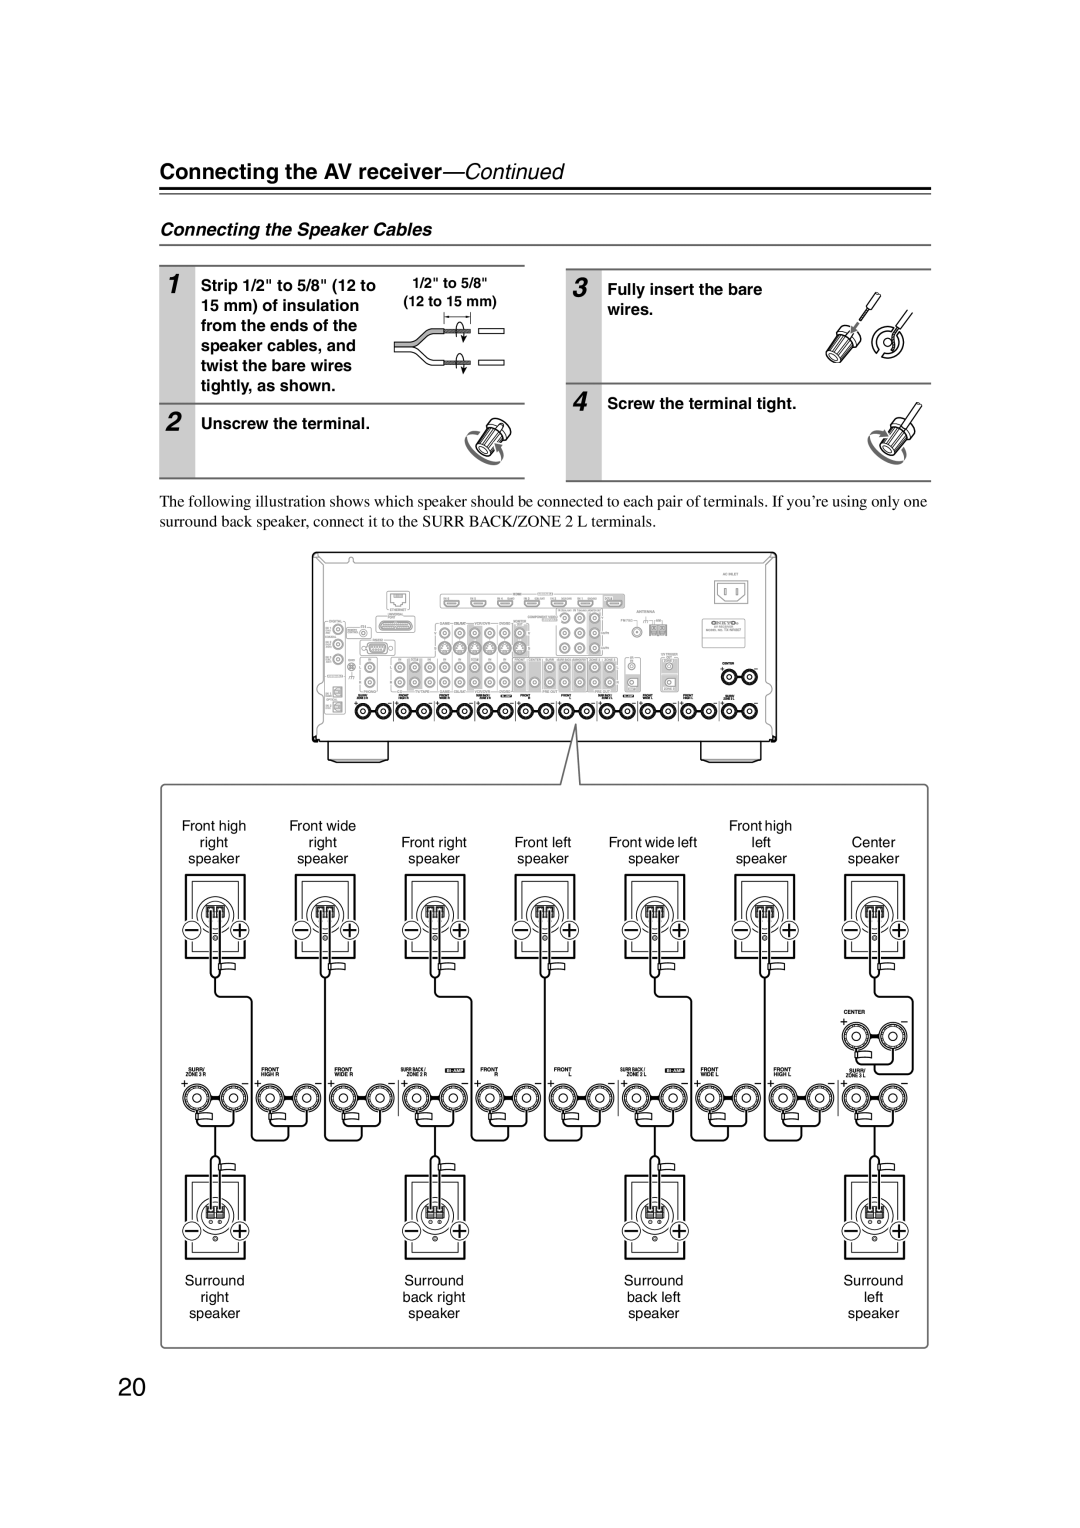 Onkyo TX-NR807 Connecting the Speaker Cables, Connecting the AV receiver—Continued, Strip 1/2 to 5/8 12 to, 12 to 15 mm 